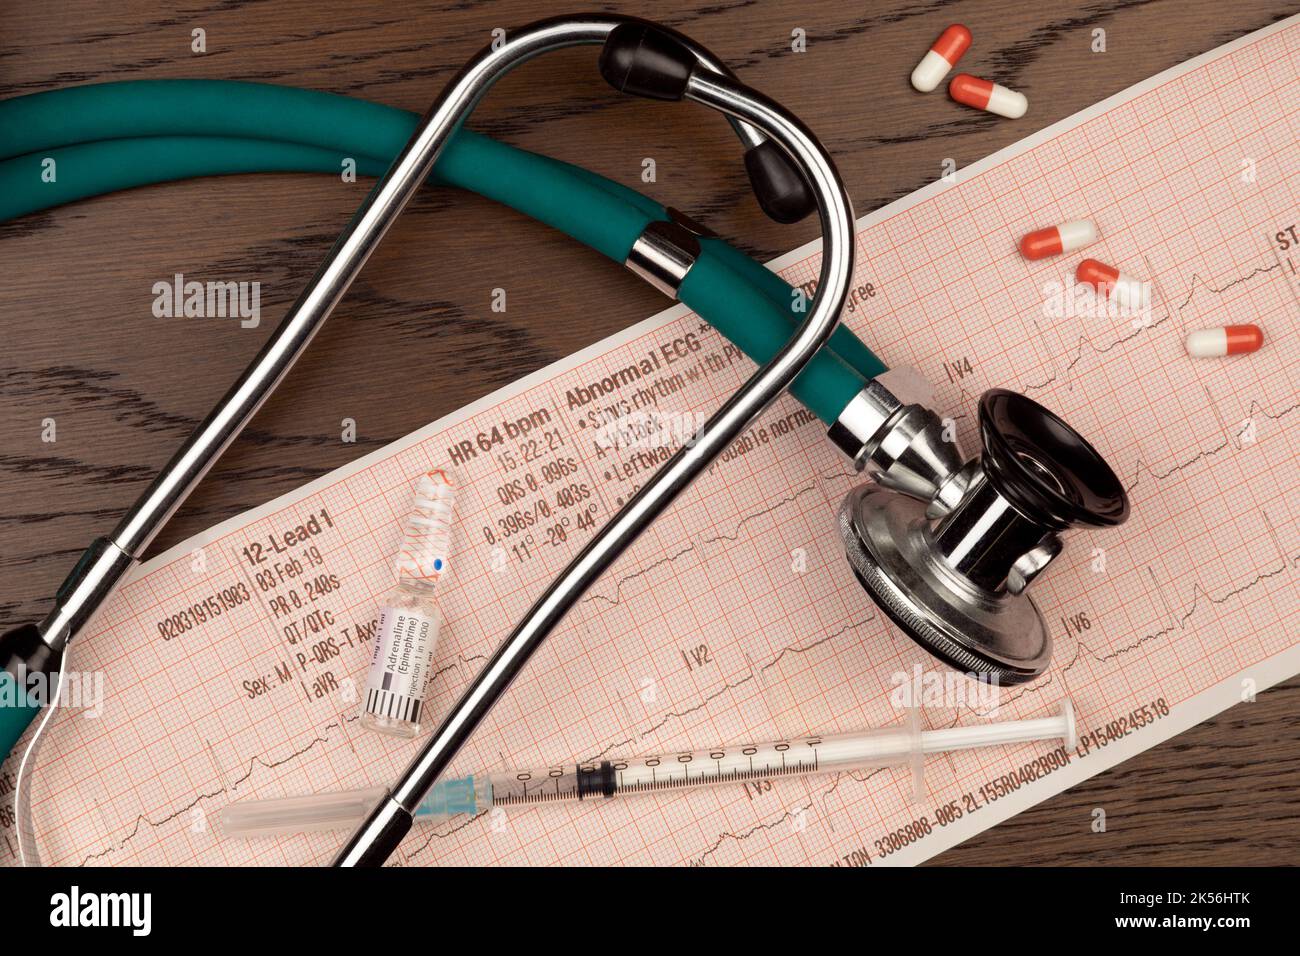 Medical treatment - Doctors stethoscope, Adrenaline injection and an ECG trace. Stock Photo